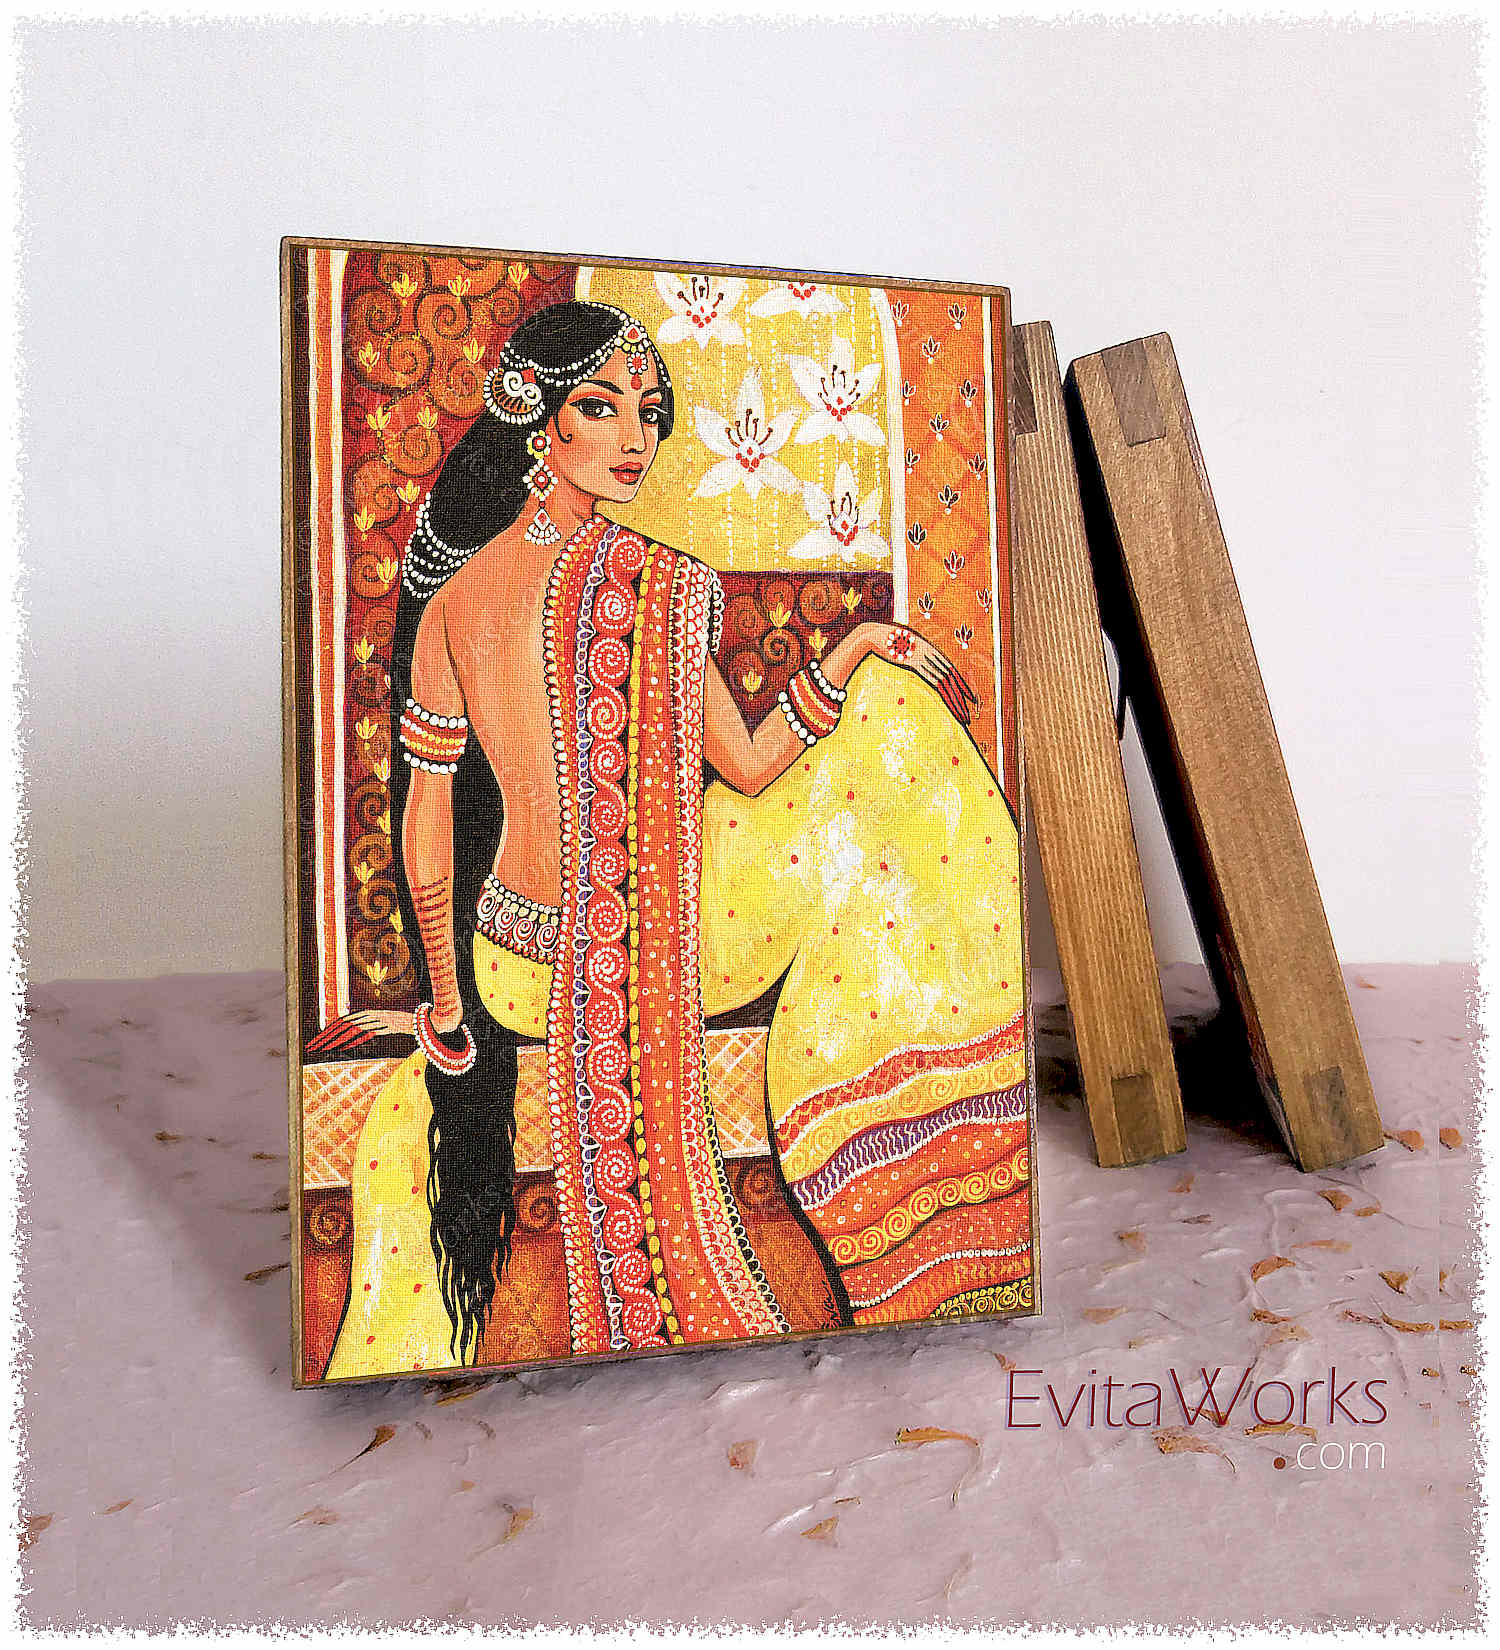 Hit to learn about "Bharat, Indian woman art" on woodblocks